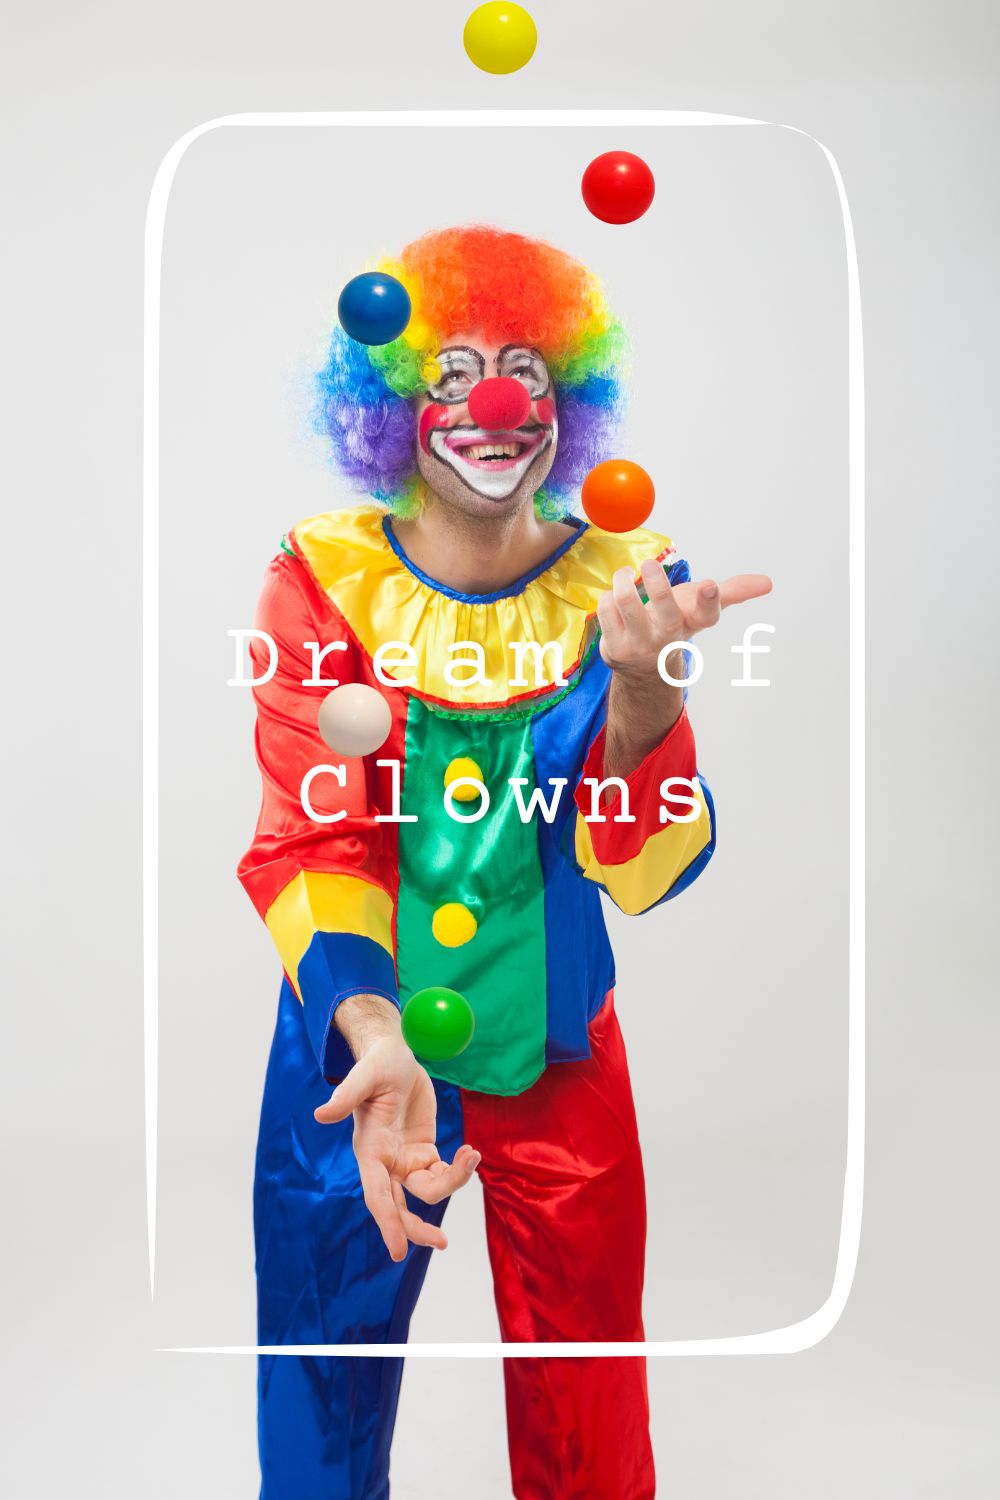 10 Dream of Clowns Meanings1